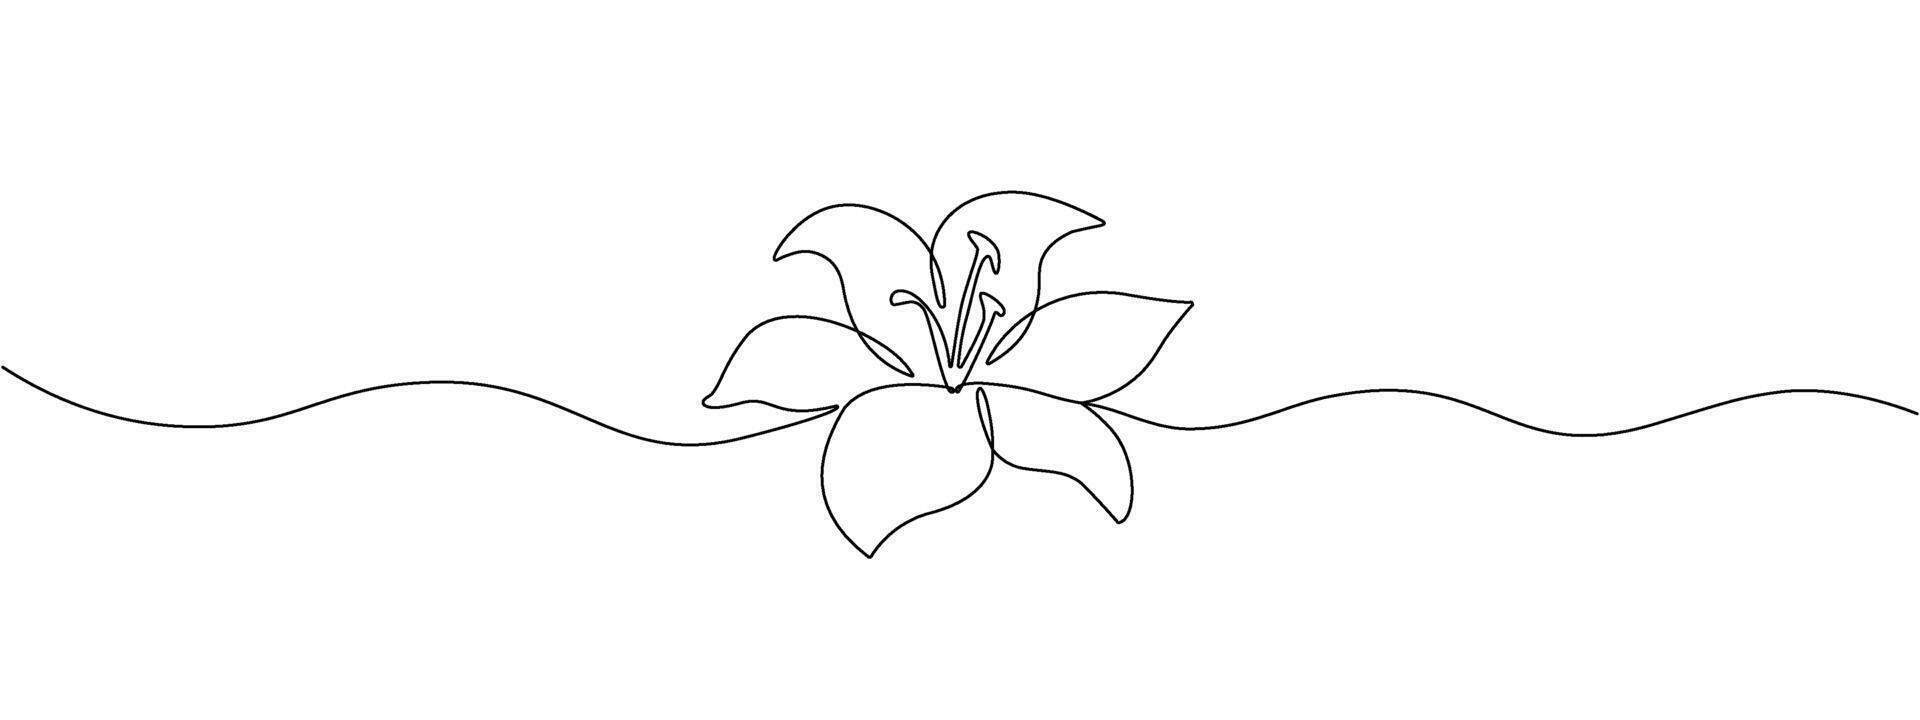 A lily flower drawn with one continuous editable line. Linear flower. illustration. vector